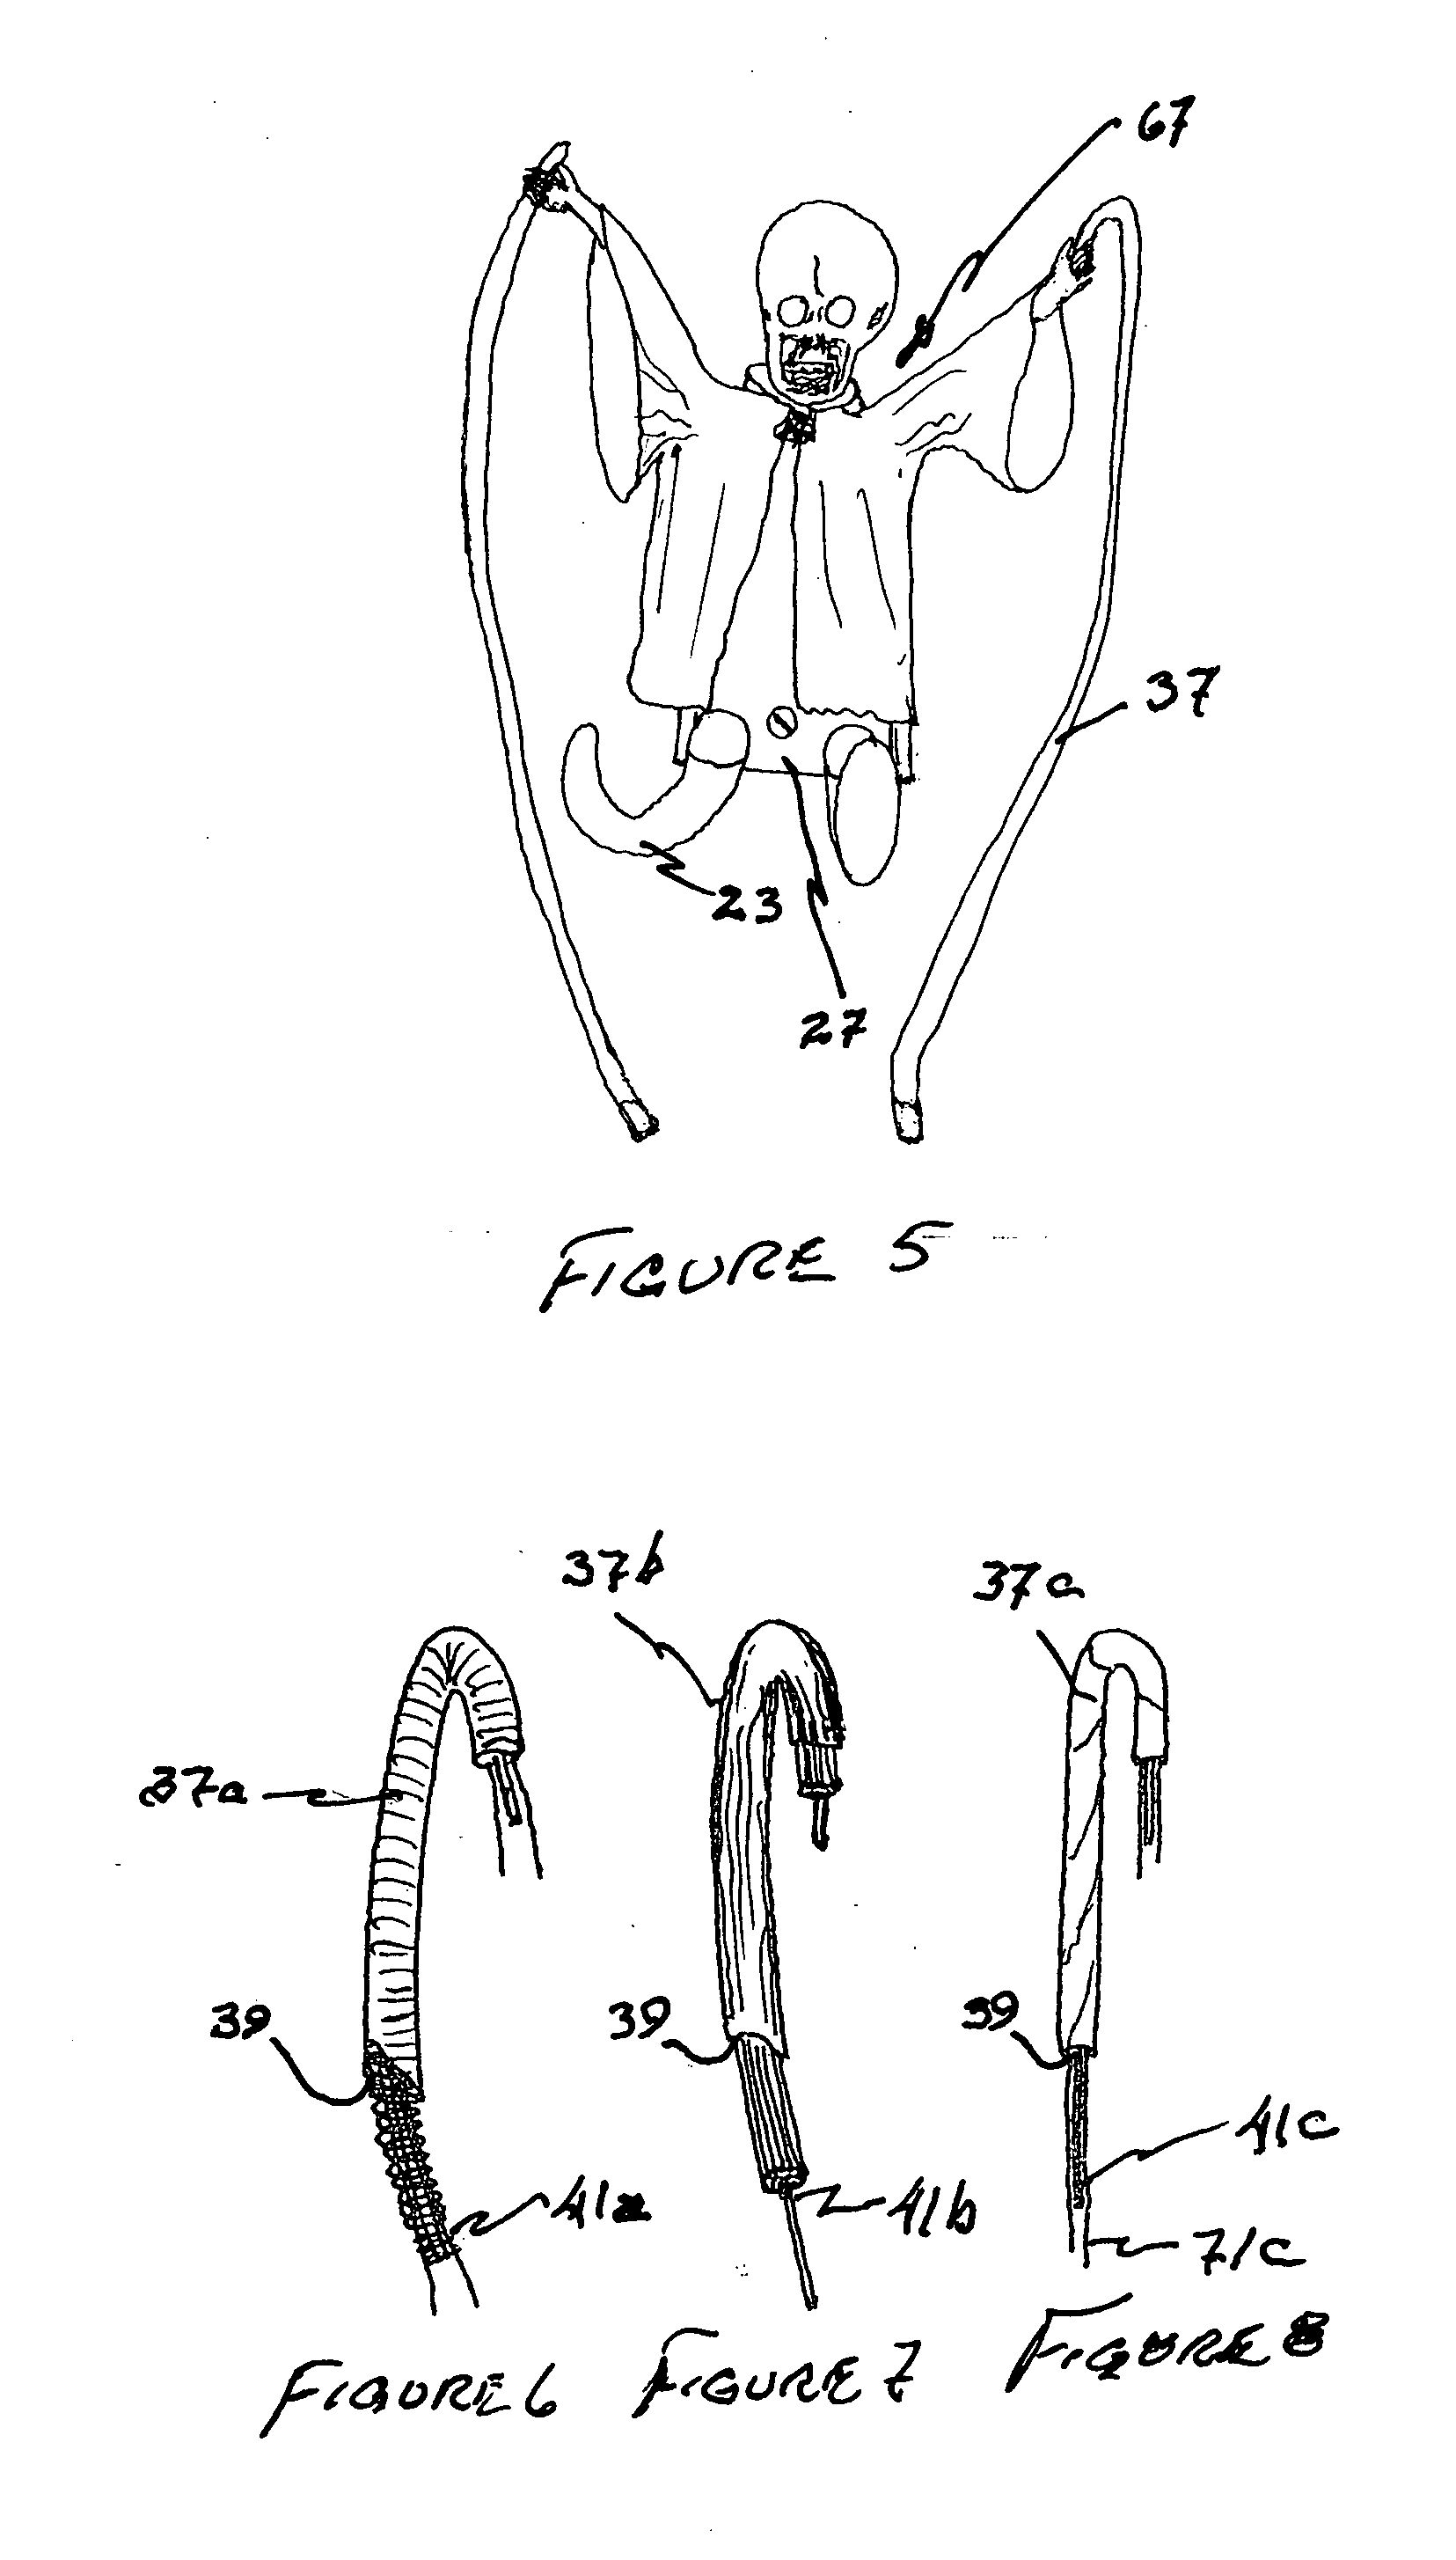 Wall mounted fixture for decoratively displaying an object